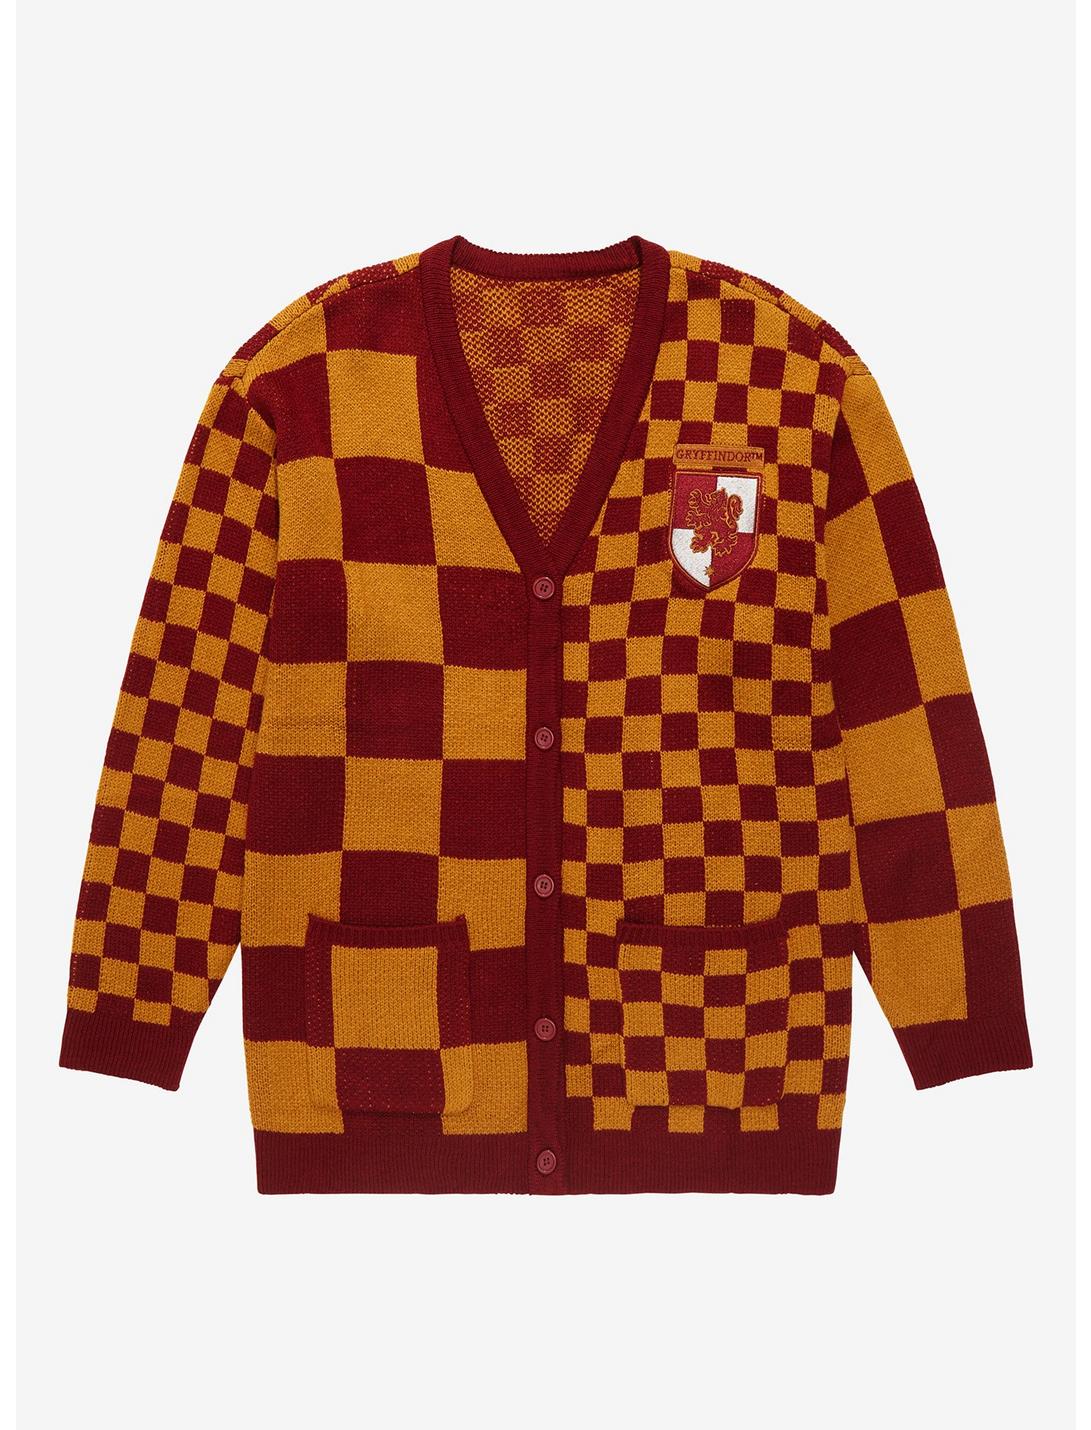 Harry Potter Gryffindor Checkered Women's Cardigan - BoxLunch Exclusive, MULTI, hi-res